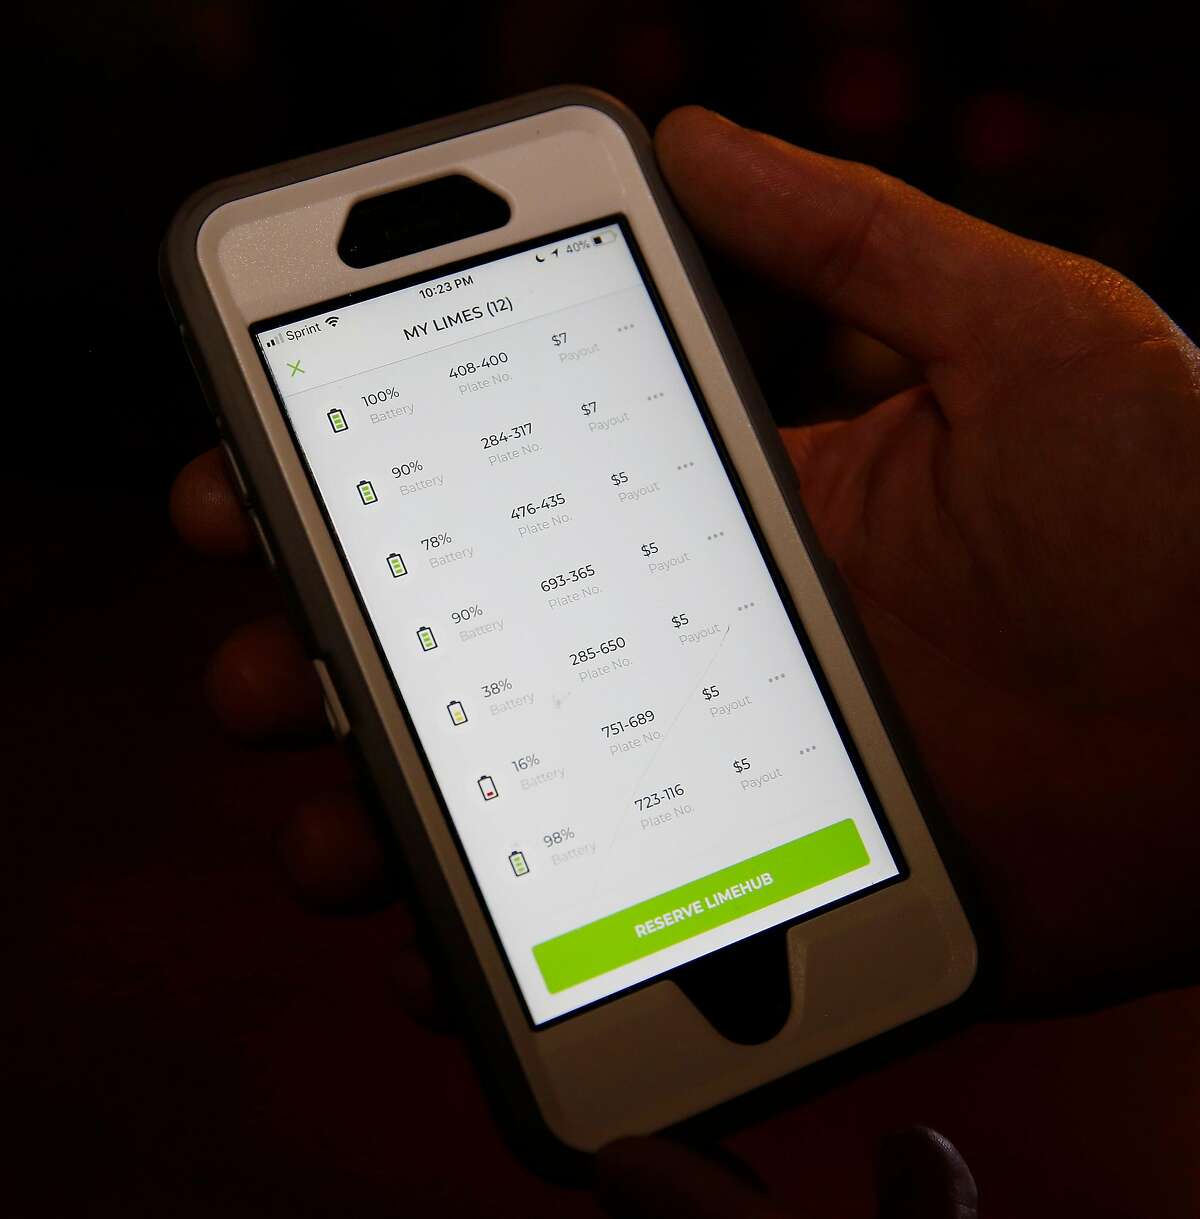 David Padover, who is a Juicer for Lime-S and Bird, keeps track of charge percentage on phone for all the harvest scooters of the night at his home in San Jose, California on July16, 2018. (Josie Lepe/Special to the Chronicle)